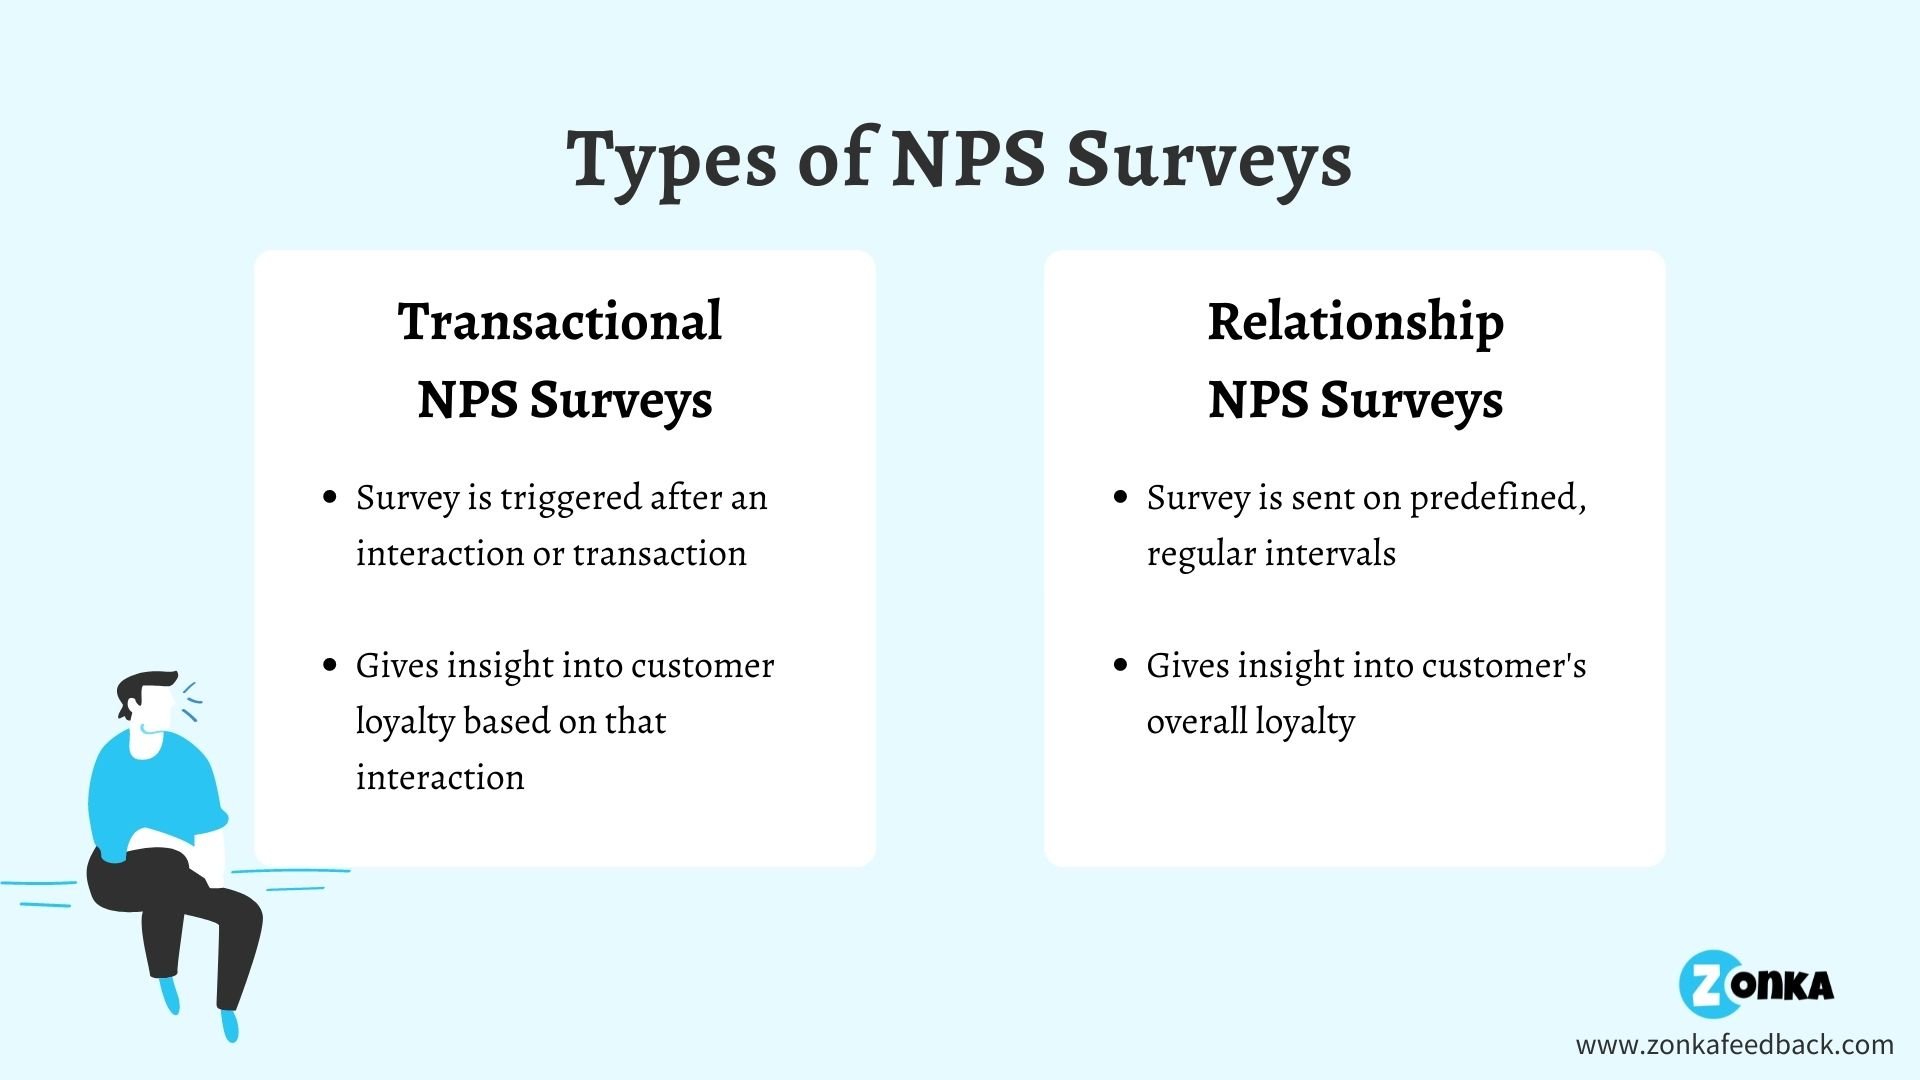 Difference between Transaction NPS Survey and Relationship NPS Surveys